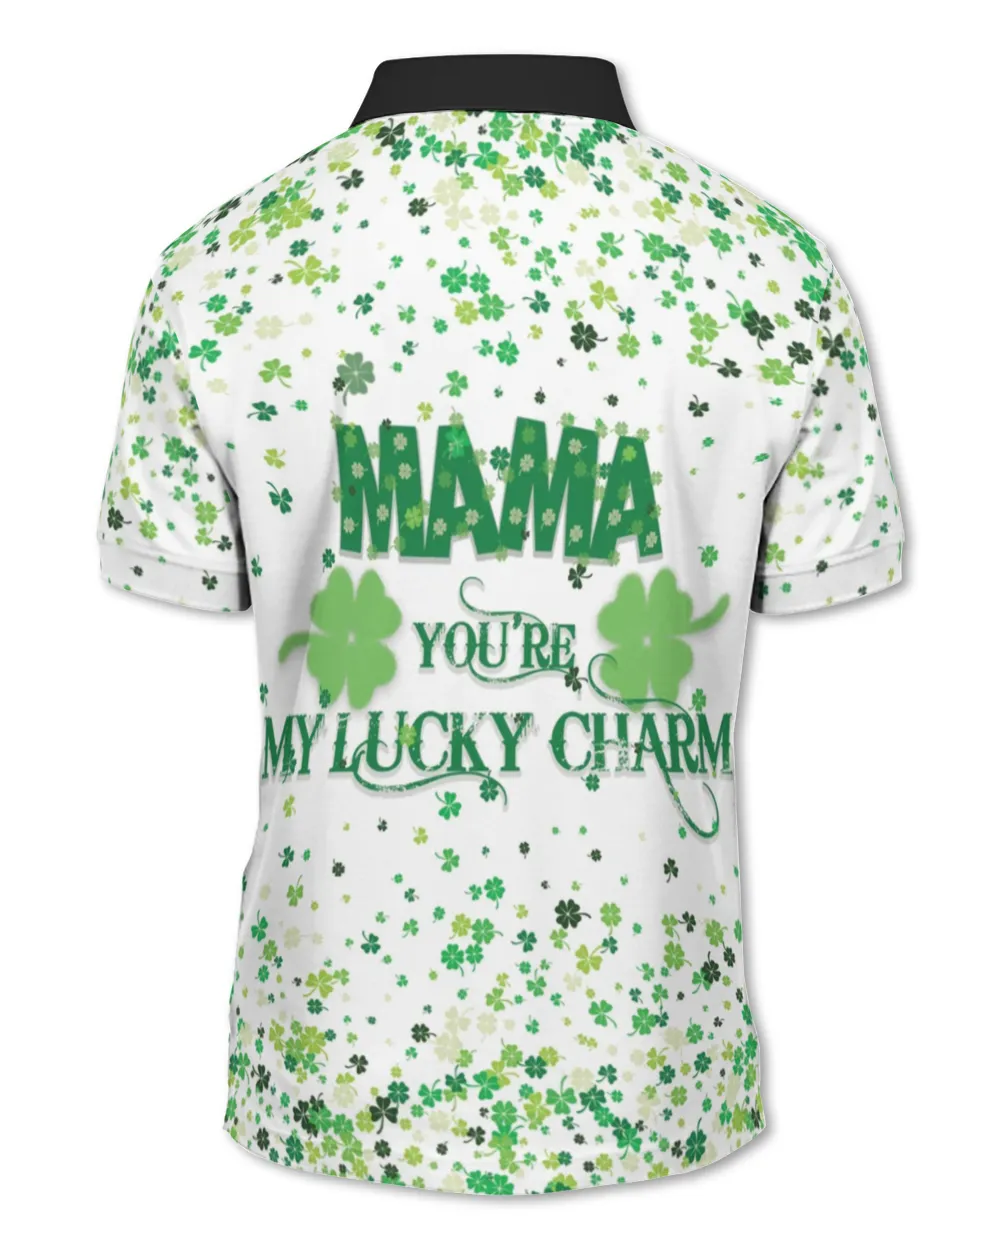 Mama, You're my lucky charm, lucky charms tshirt